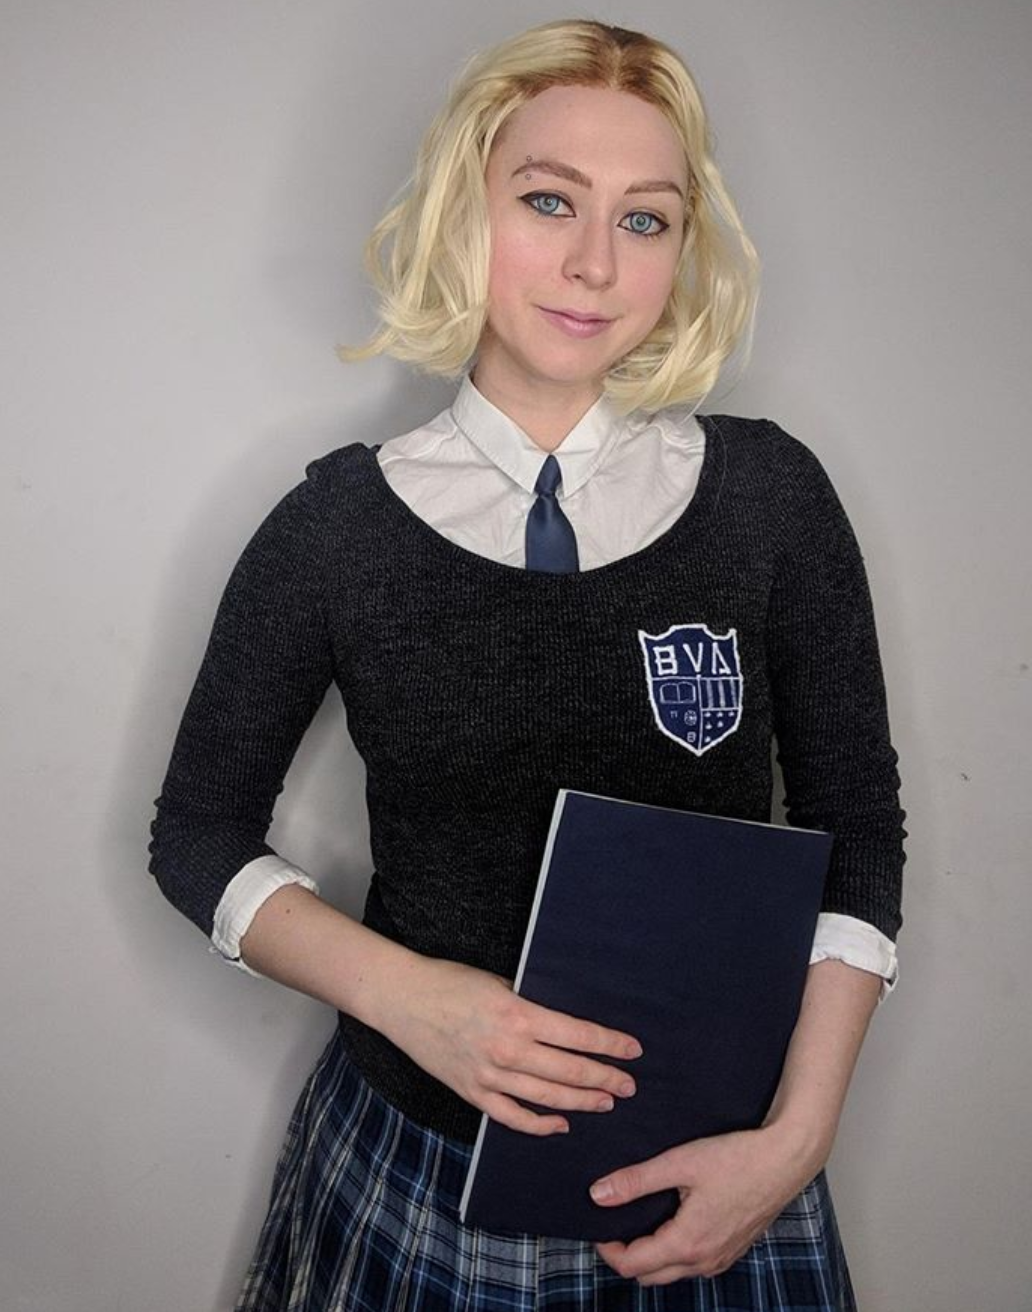 A girl dressed in a Gwen cosplay holds a book.